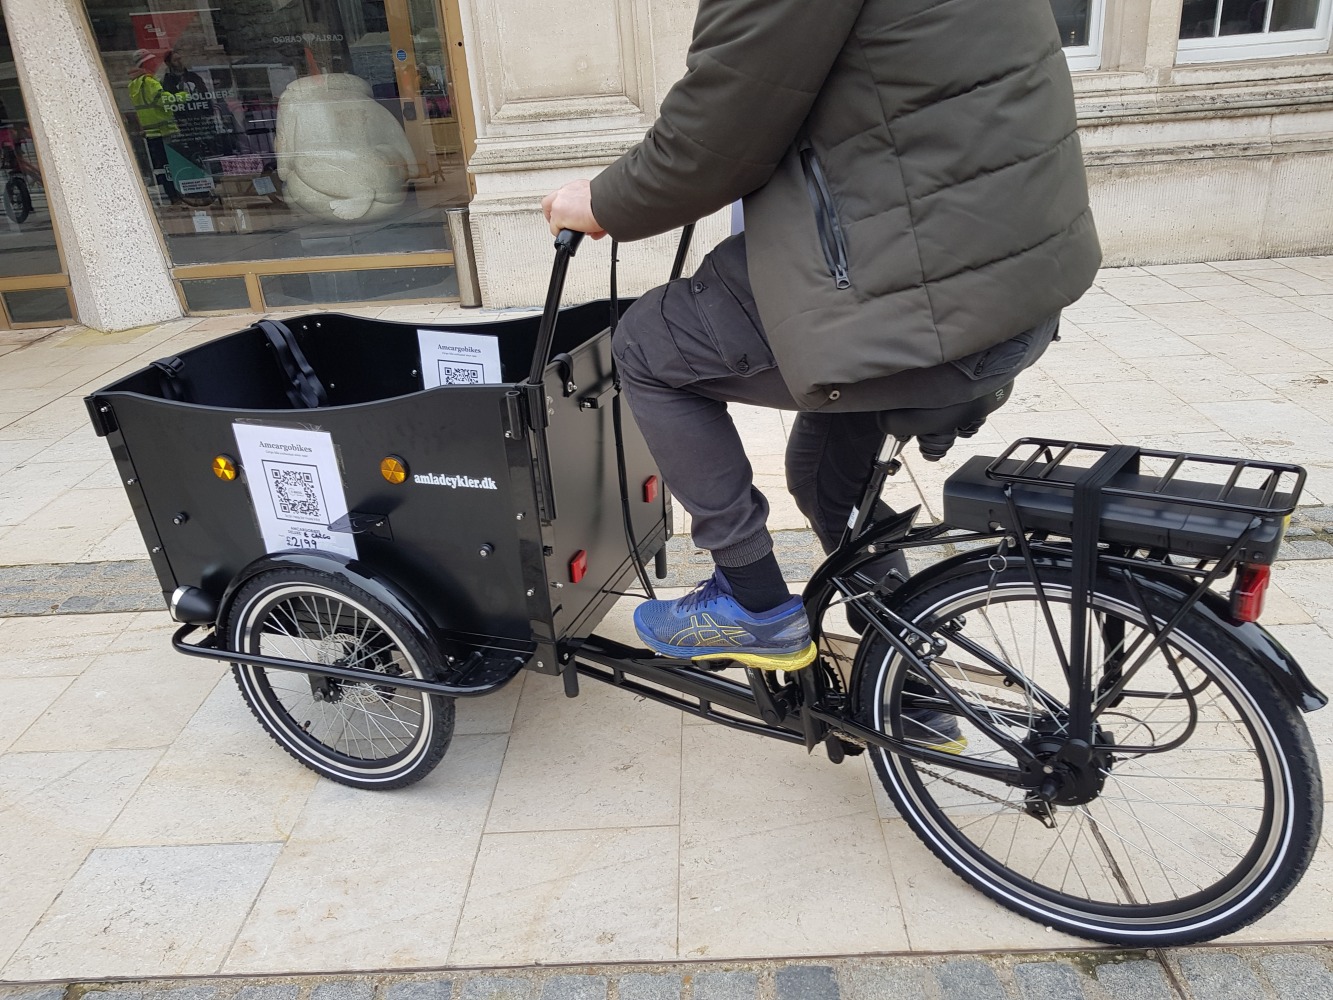 Round up of the cargo bike festival in London